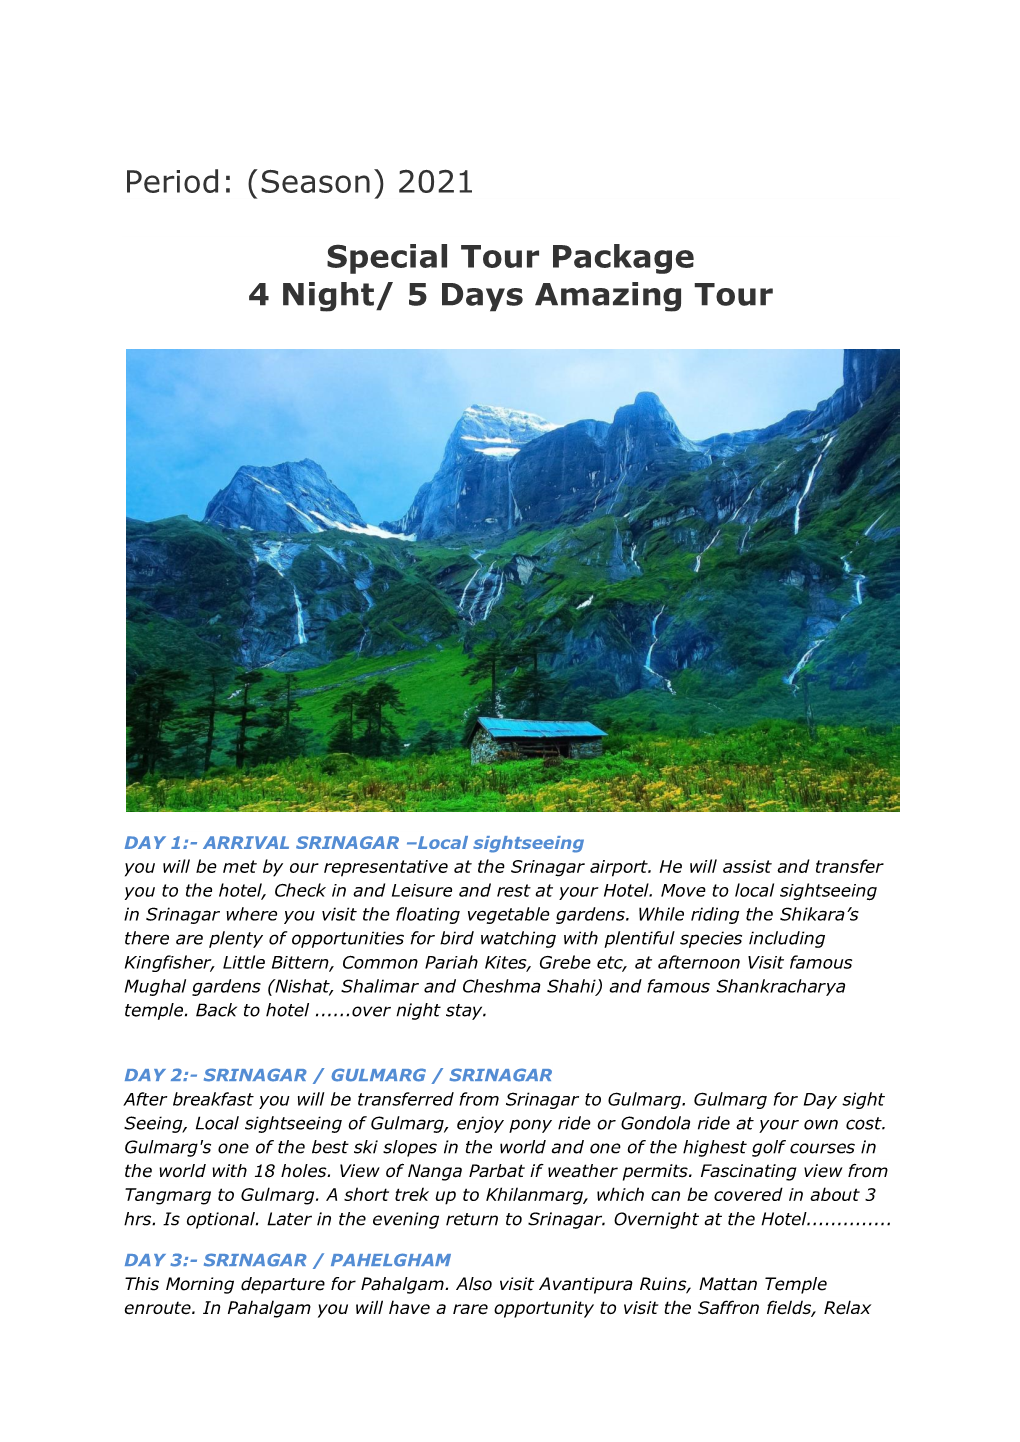 2021 Special Tour Package 4 Night